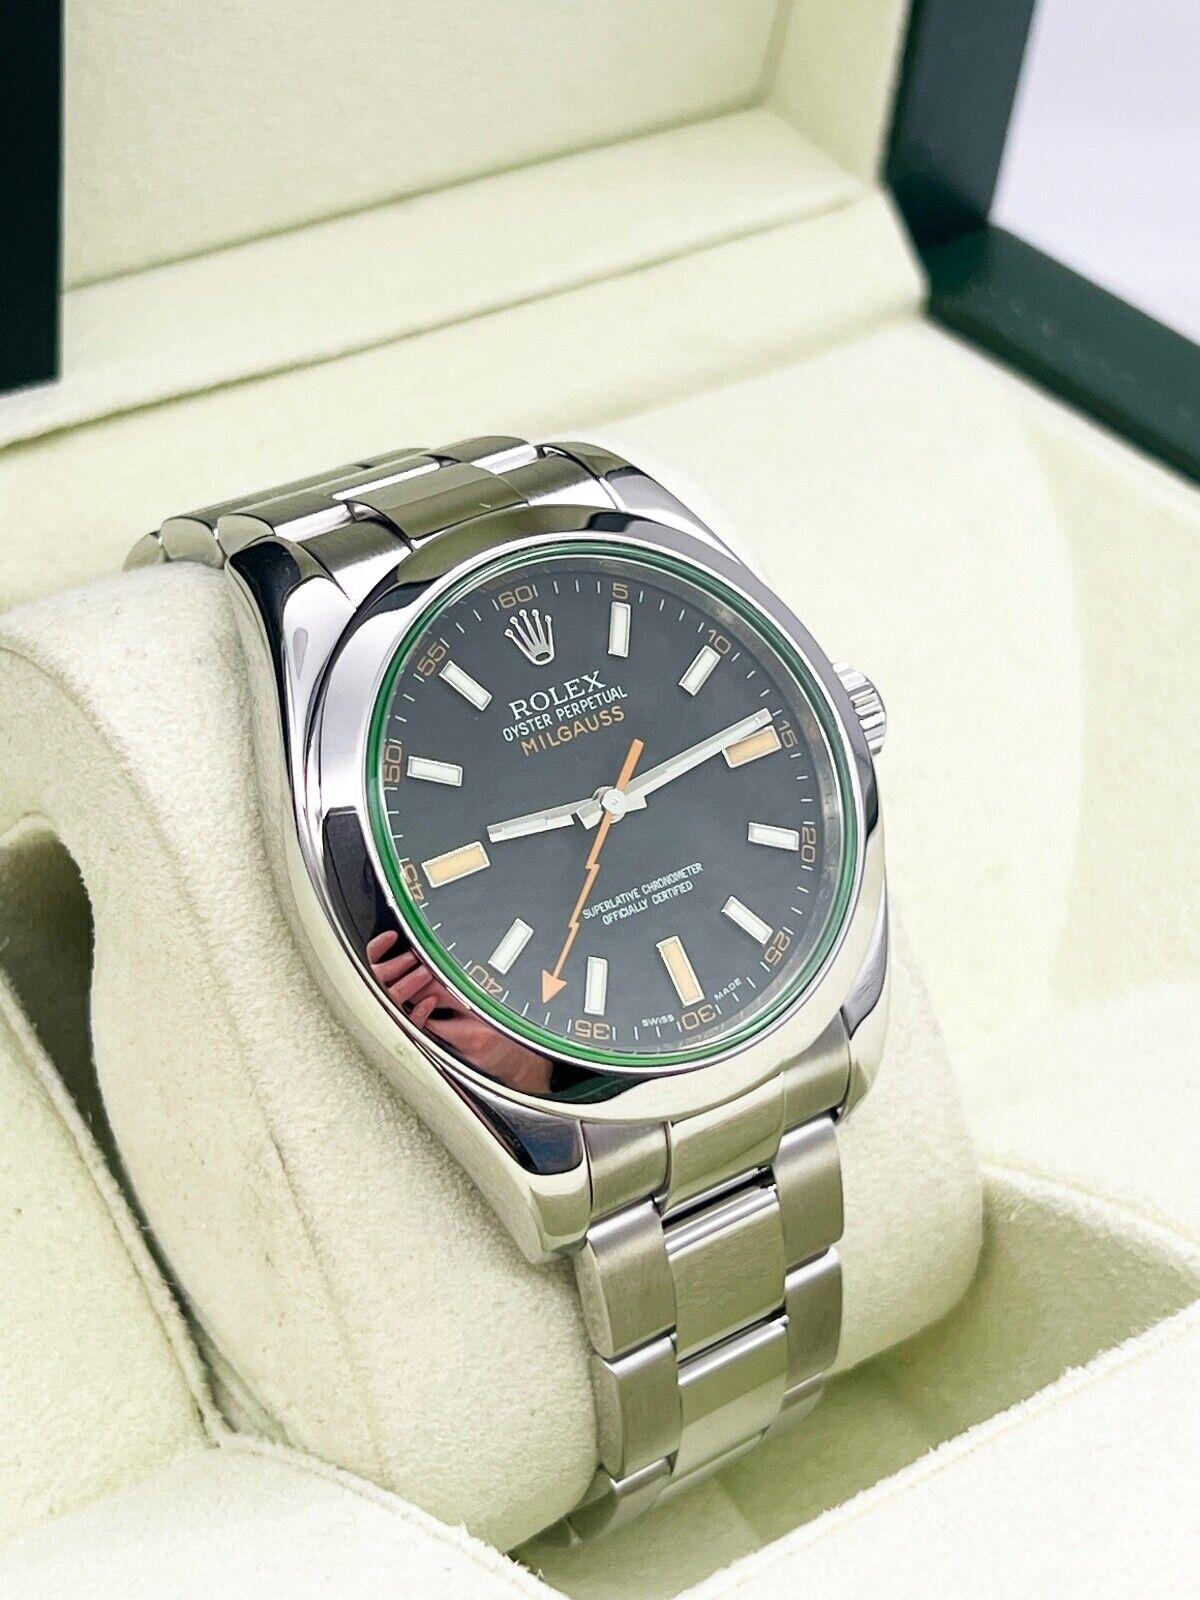 Style Number: 116400

Serial: V713***

Year: 2010
 
Model: Milgauss
 
Case Material: Stainless Steel
 
Band: Stainless Steel
  
Bezel: Stainless Steel
  
Dial: Black
 
Face: Green Sapphire Crystal
 
Case Size: 40mm
 
Includes: 
-Rolex Box &